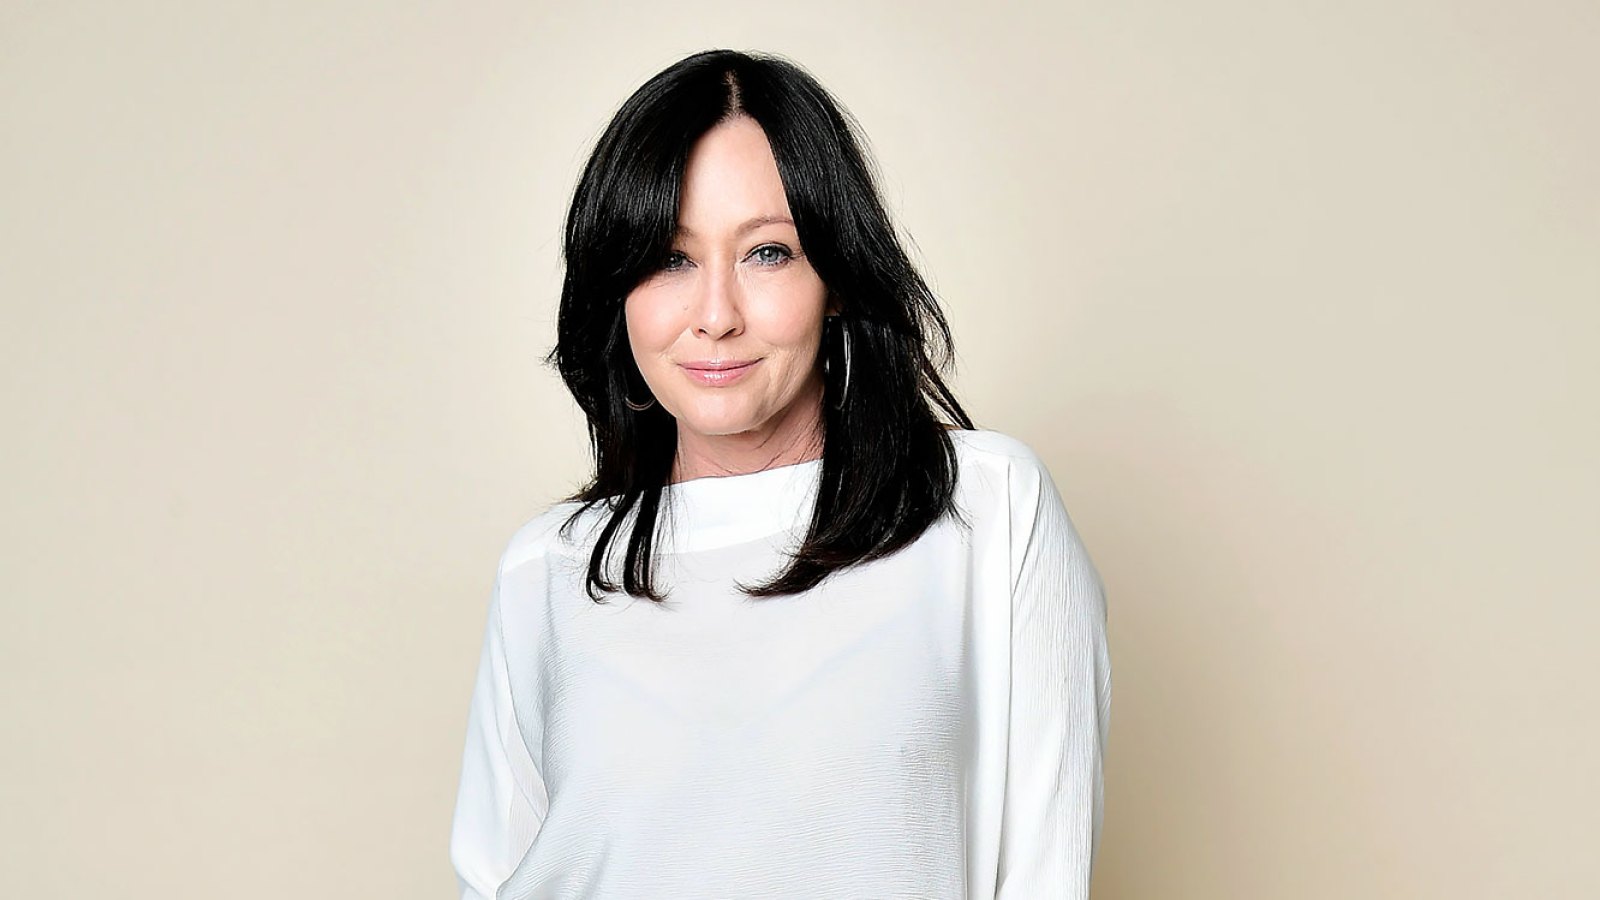 Feature Shannen Doherty Is Downsizing Her Belongings Amid Breast Cancer Battle